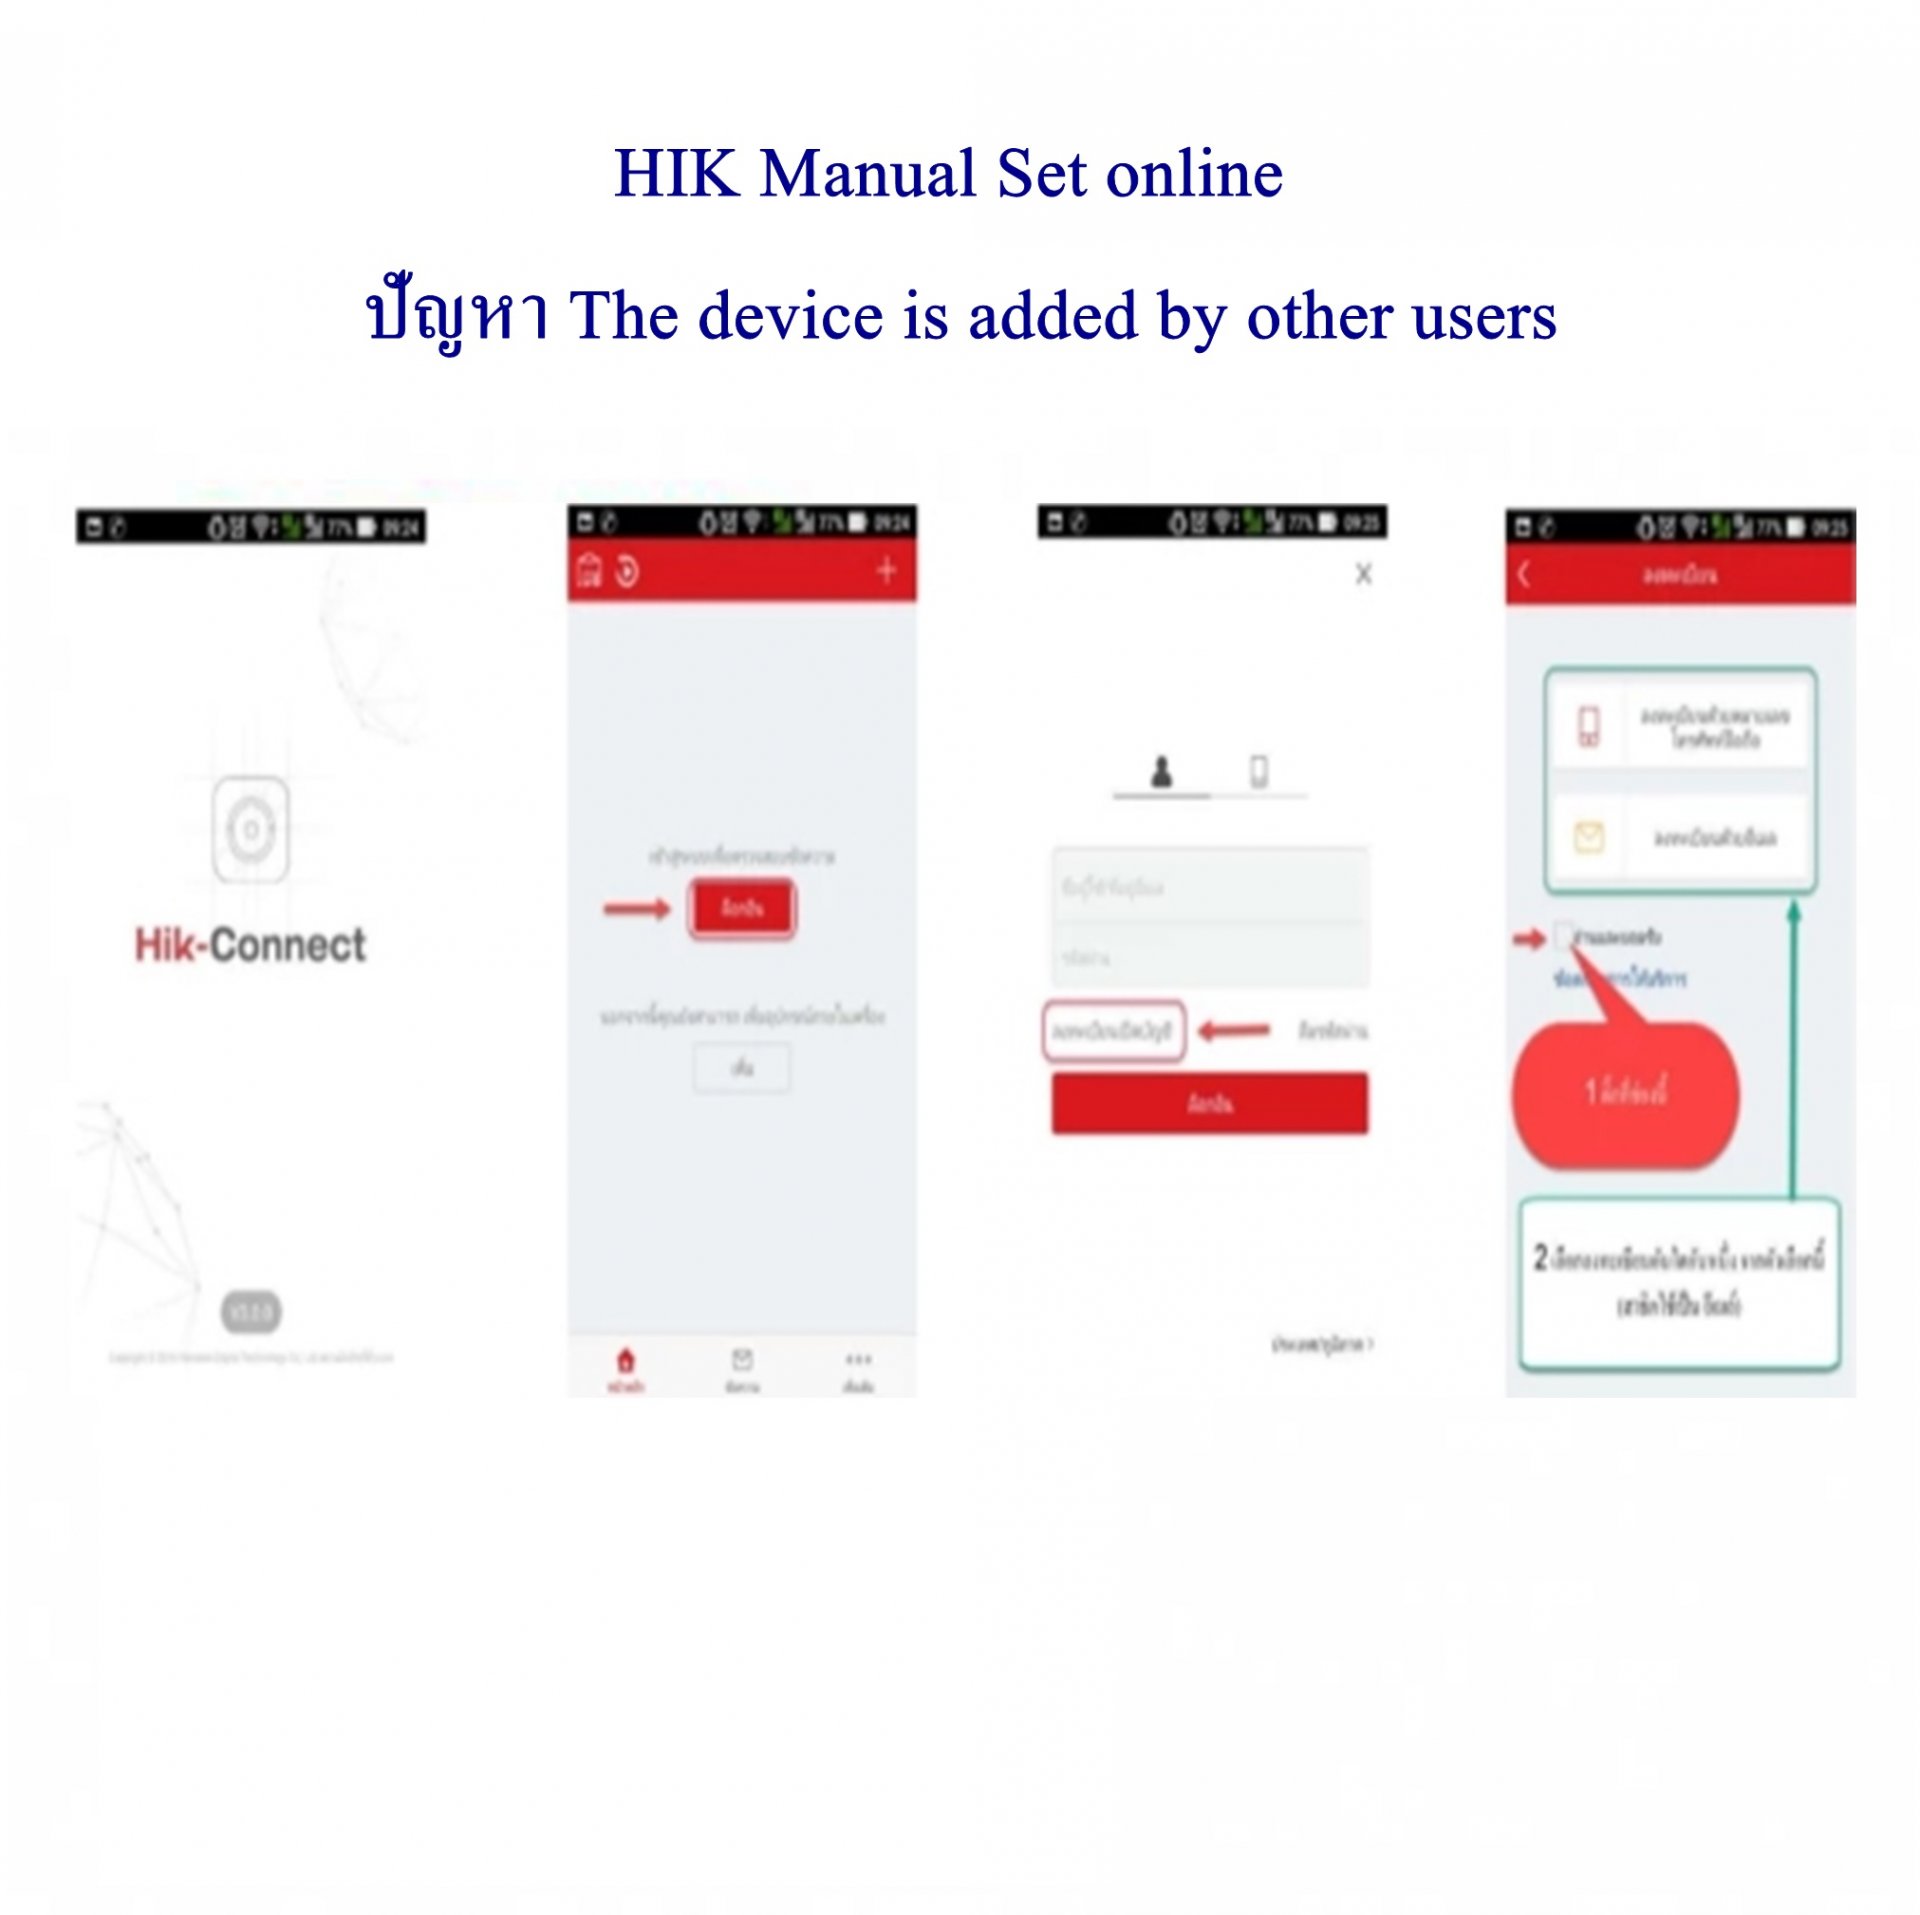 HIK Manual Set online ปัญหา The device is added by other users